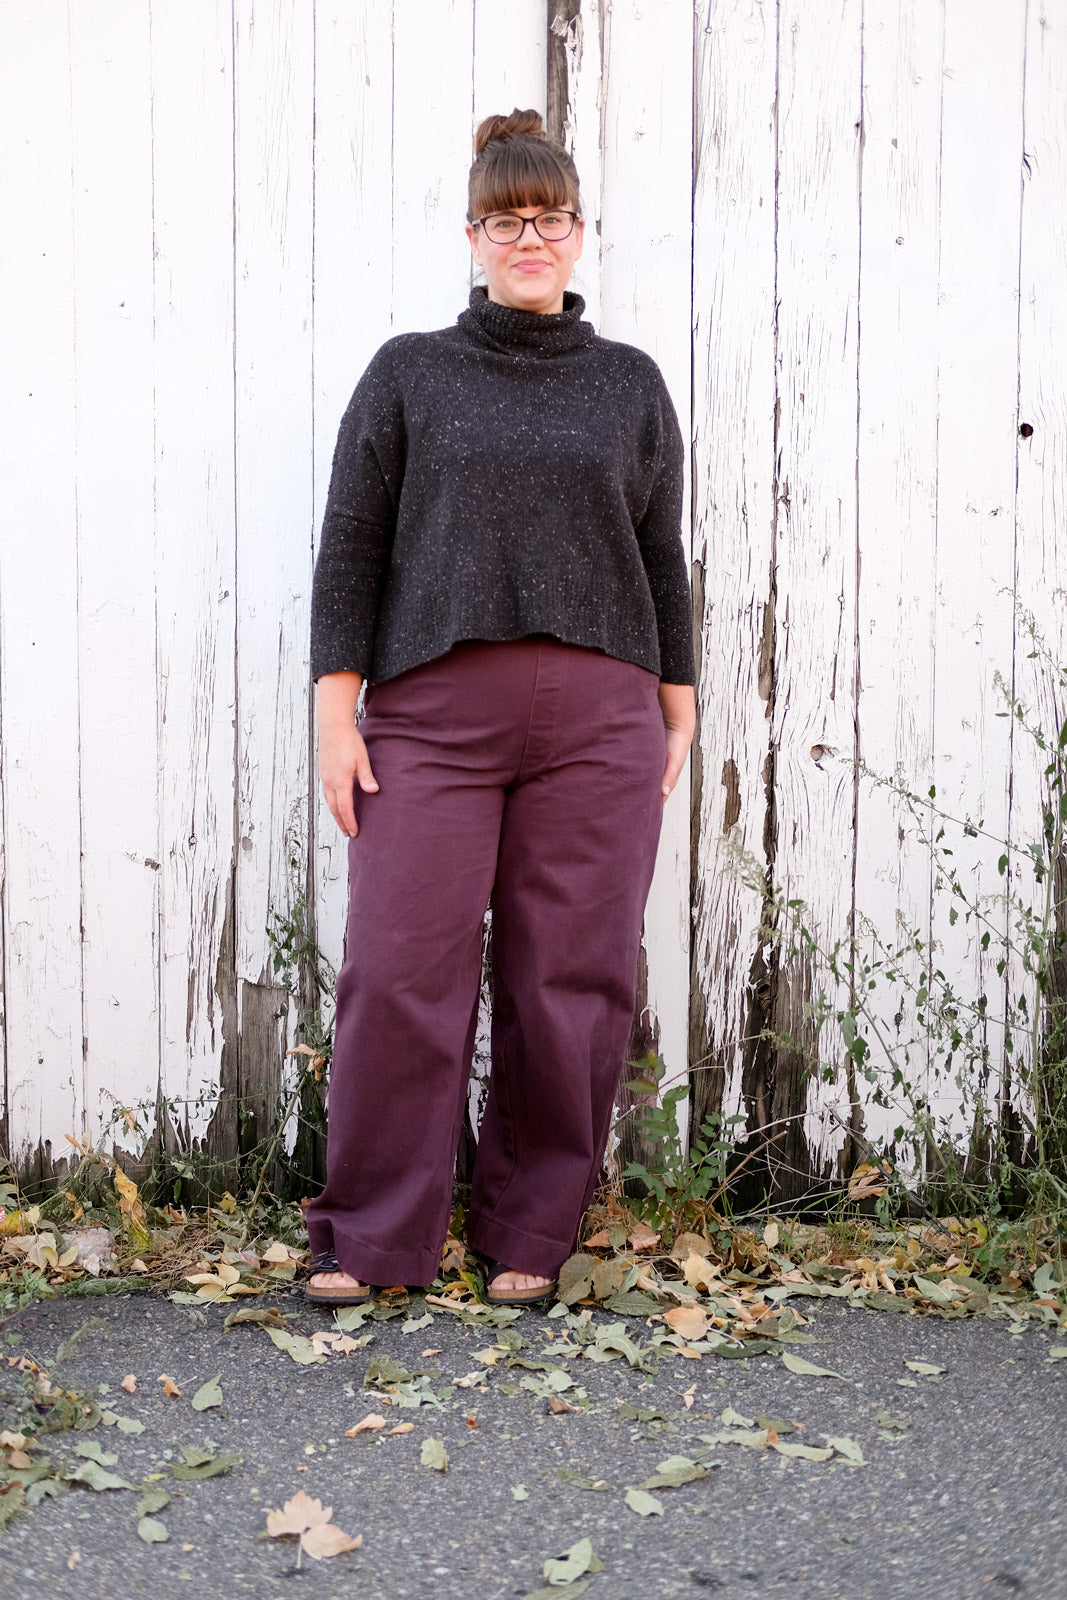 Kaylee's Brodeaux Jenny Trousers from Closet Case Patterns